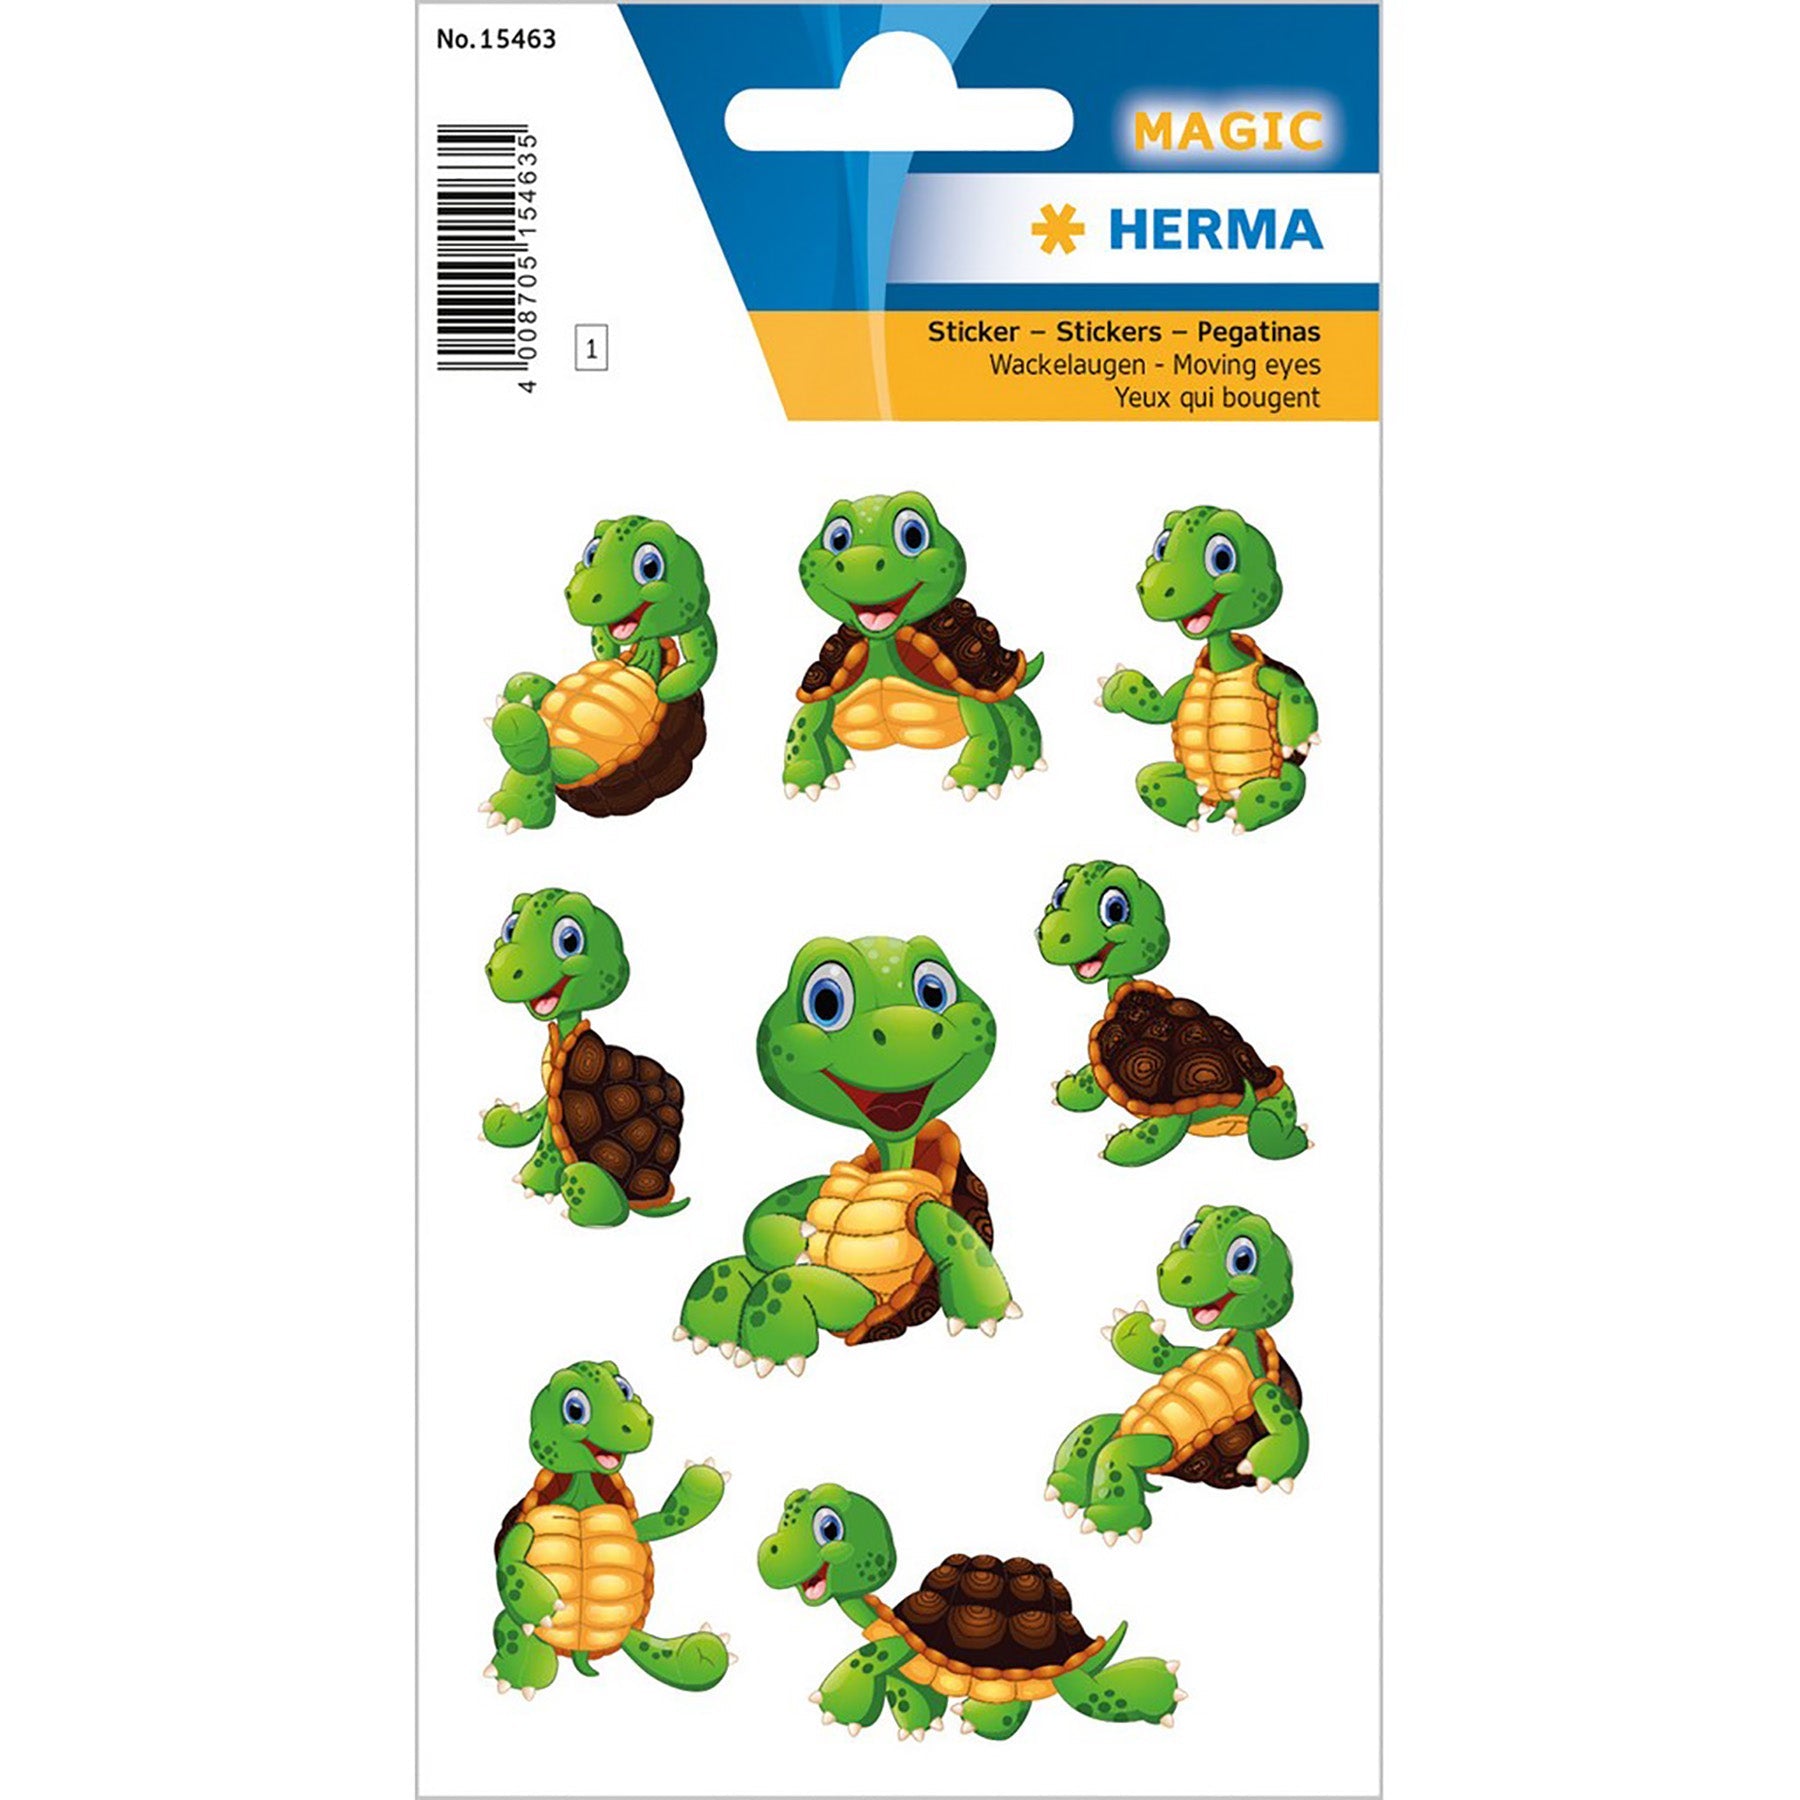 Herma Magic Stickers Little Turtle Moving Eyes 4.75x3.1in Sheet